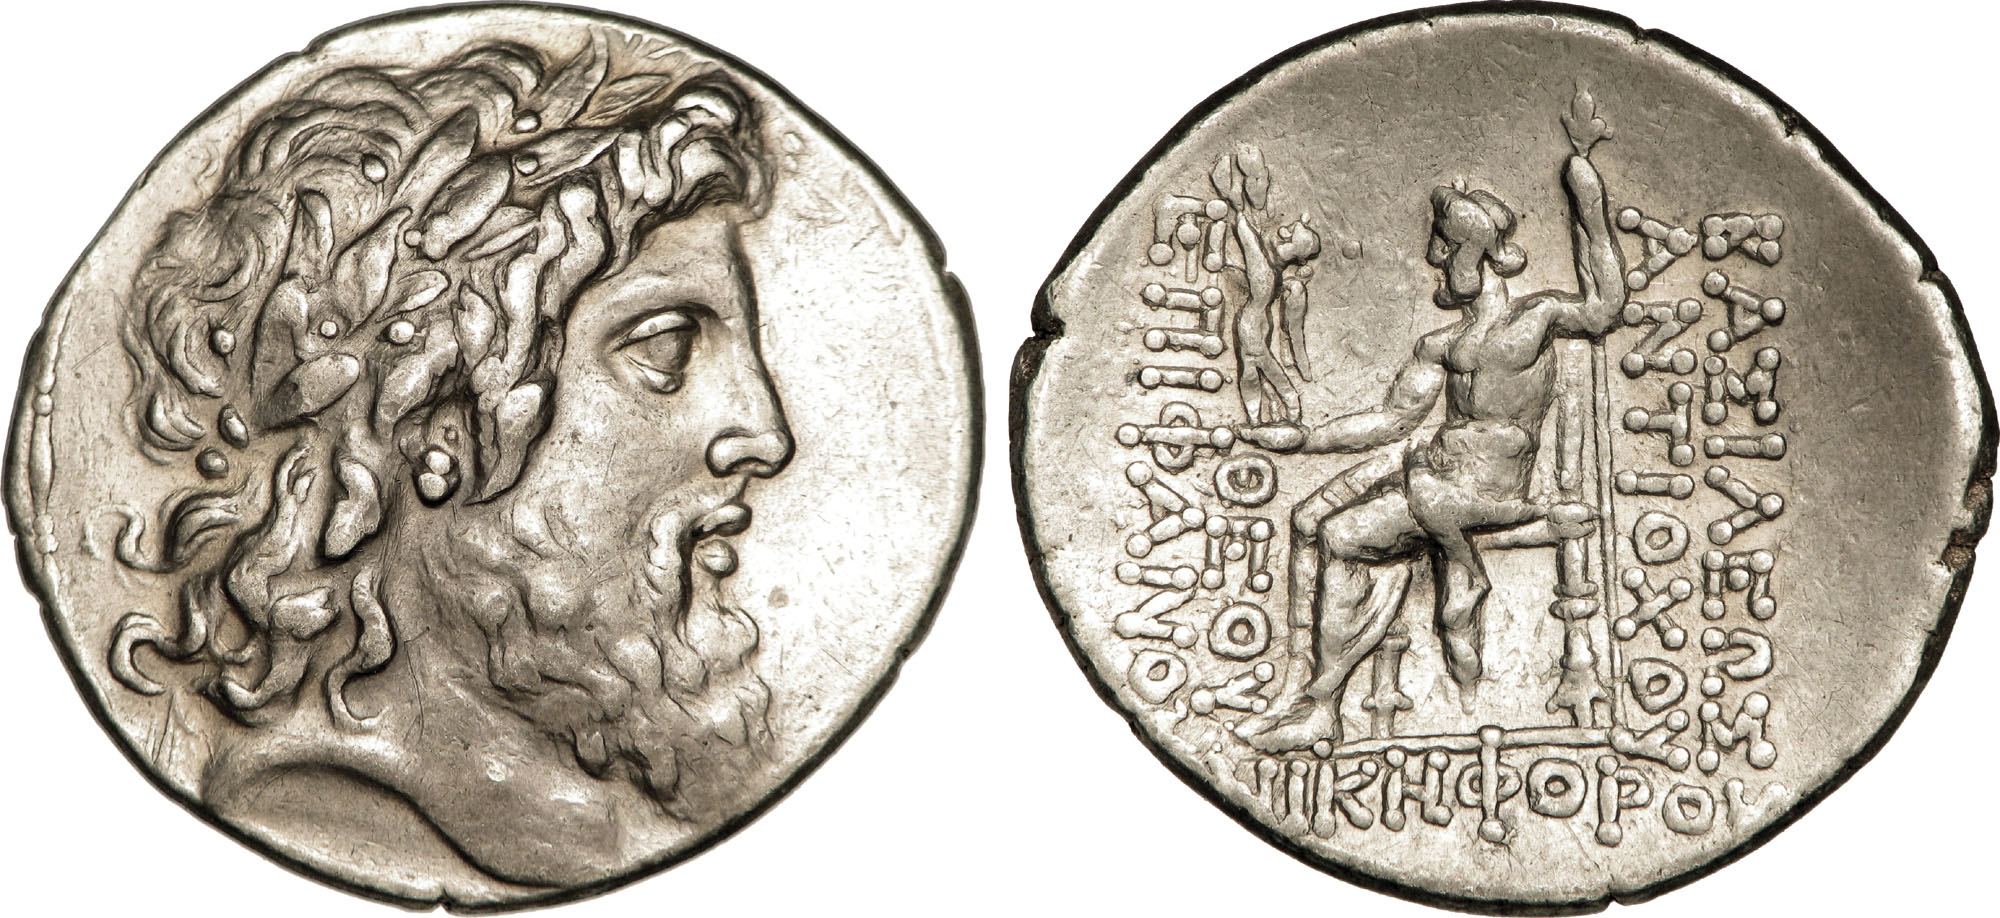 Two sides of a coin. One side shows the head of Zeus, and the other shows Zeus seated holding a statue of Nike.